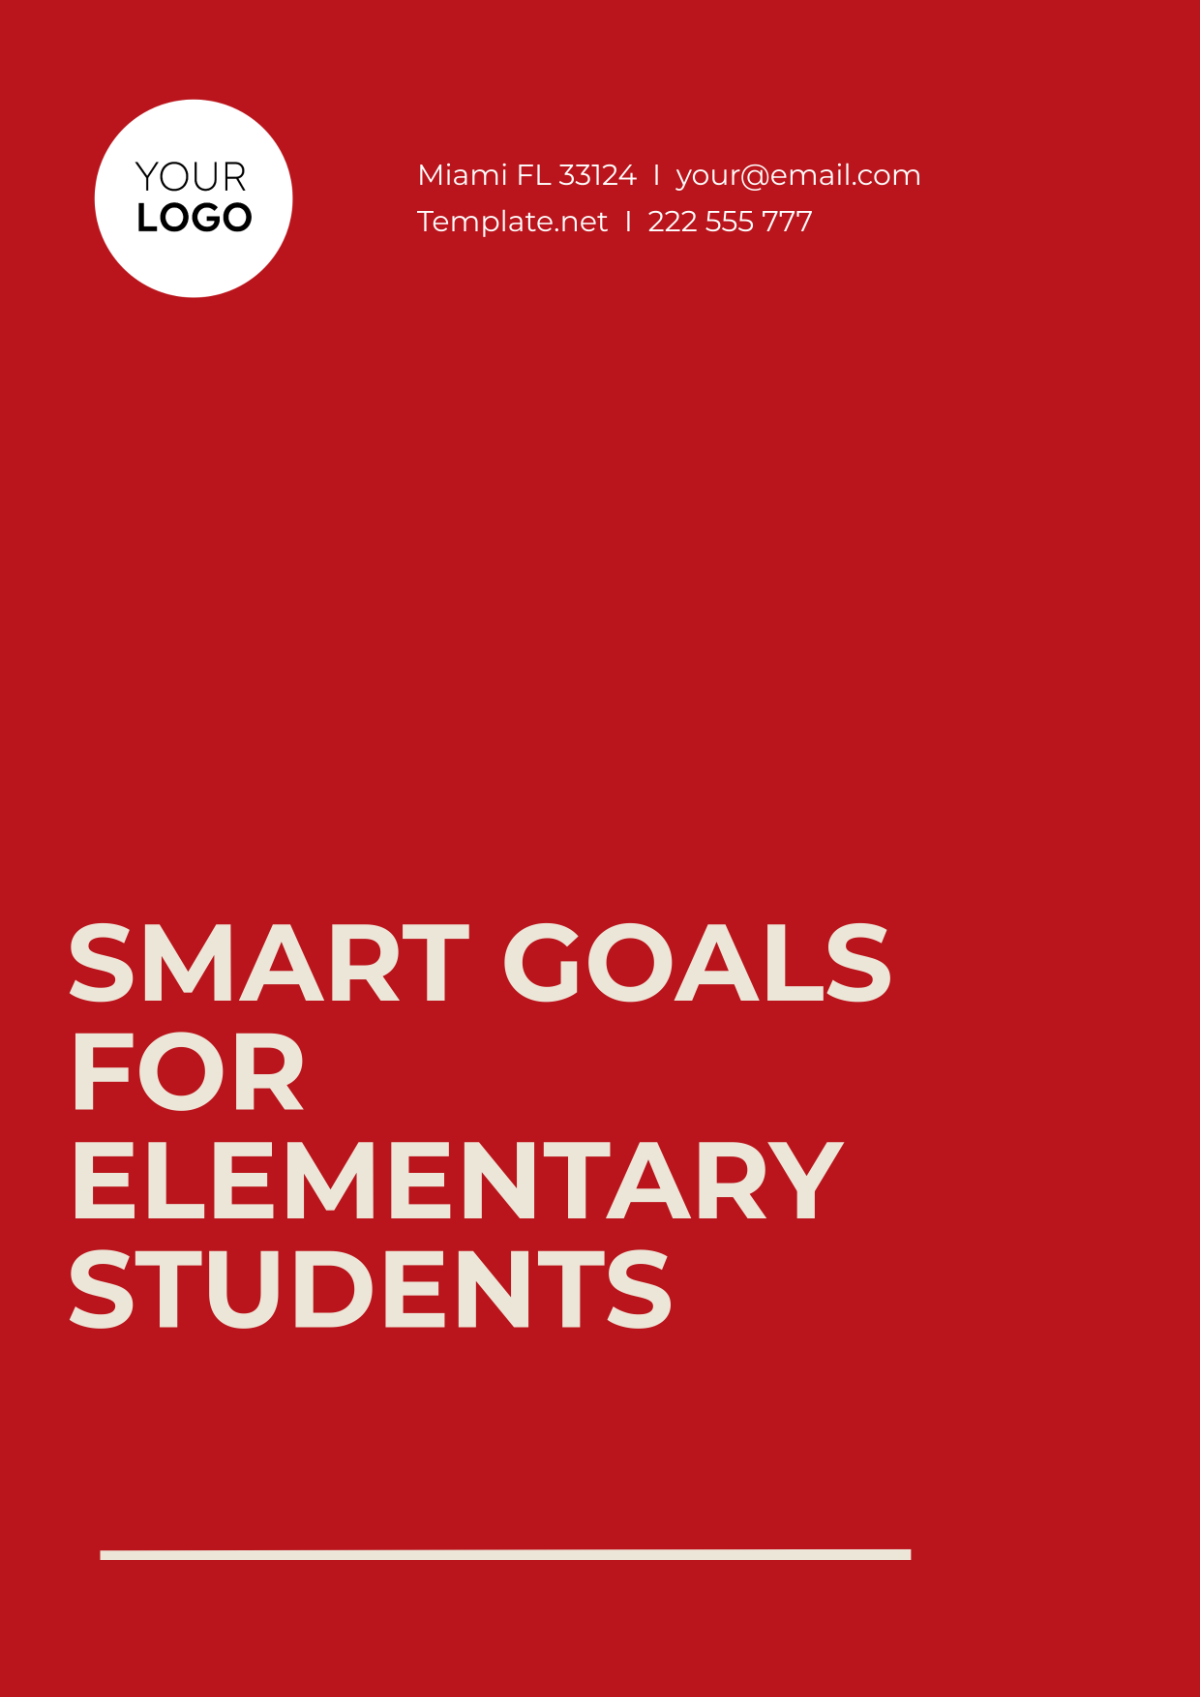 SMART Goals For Elementary Students Template